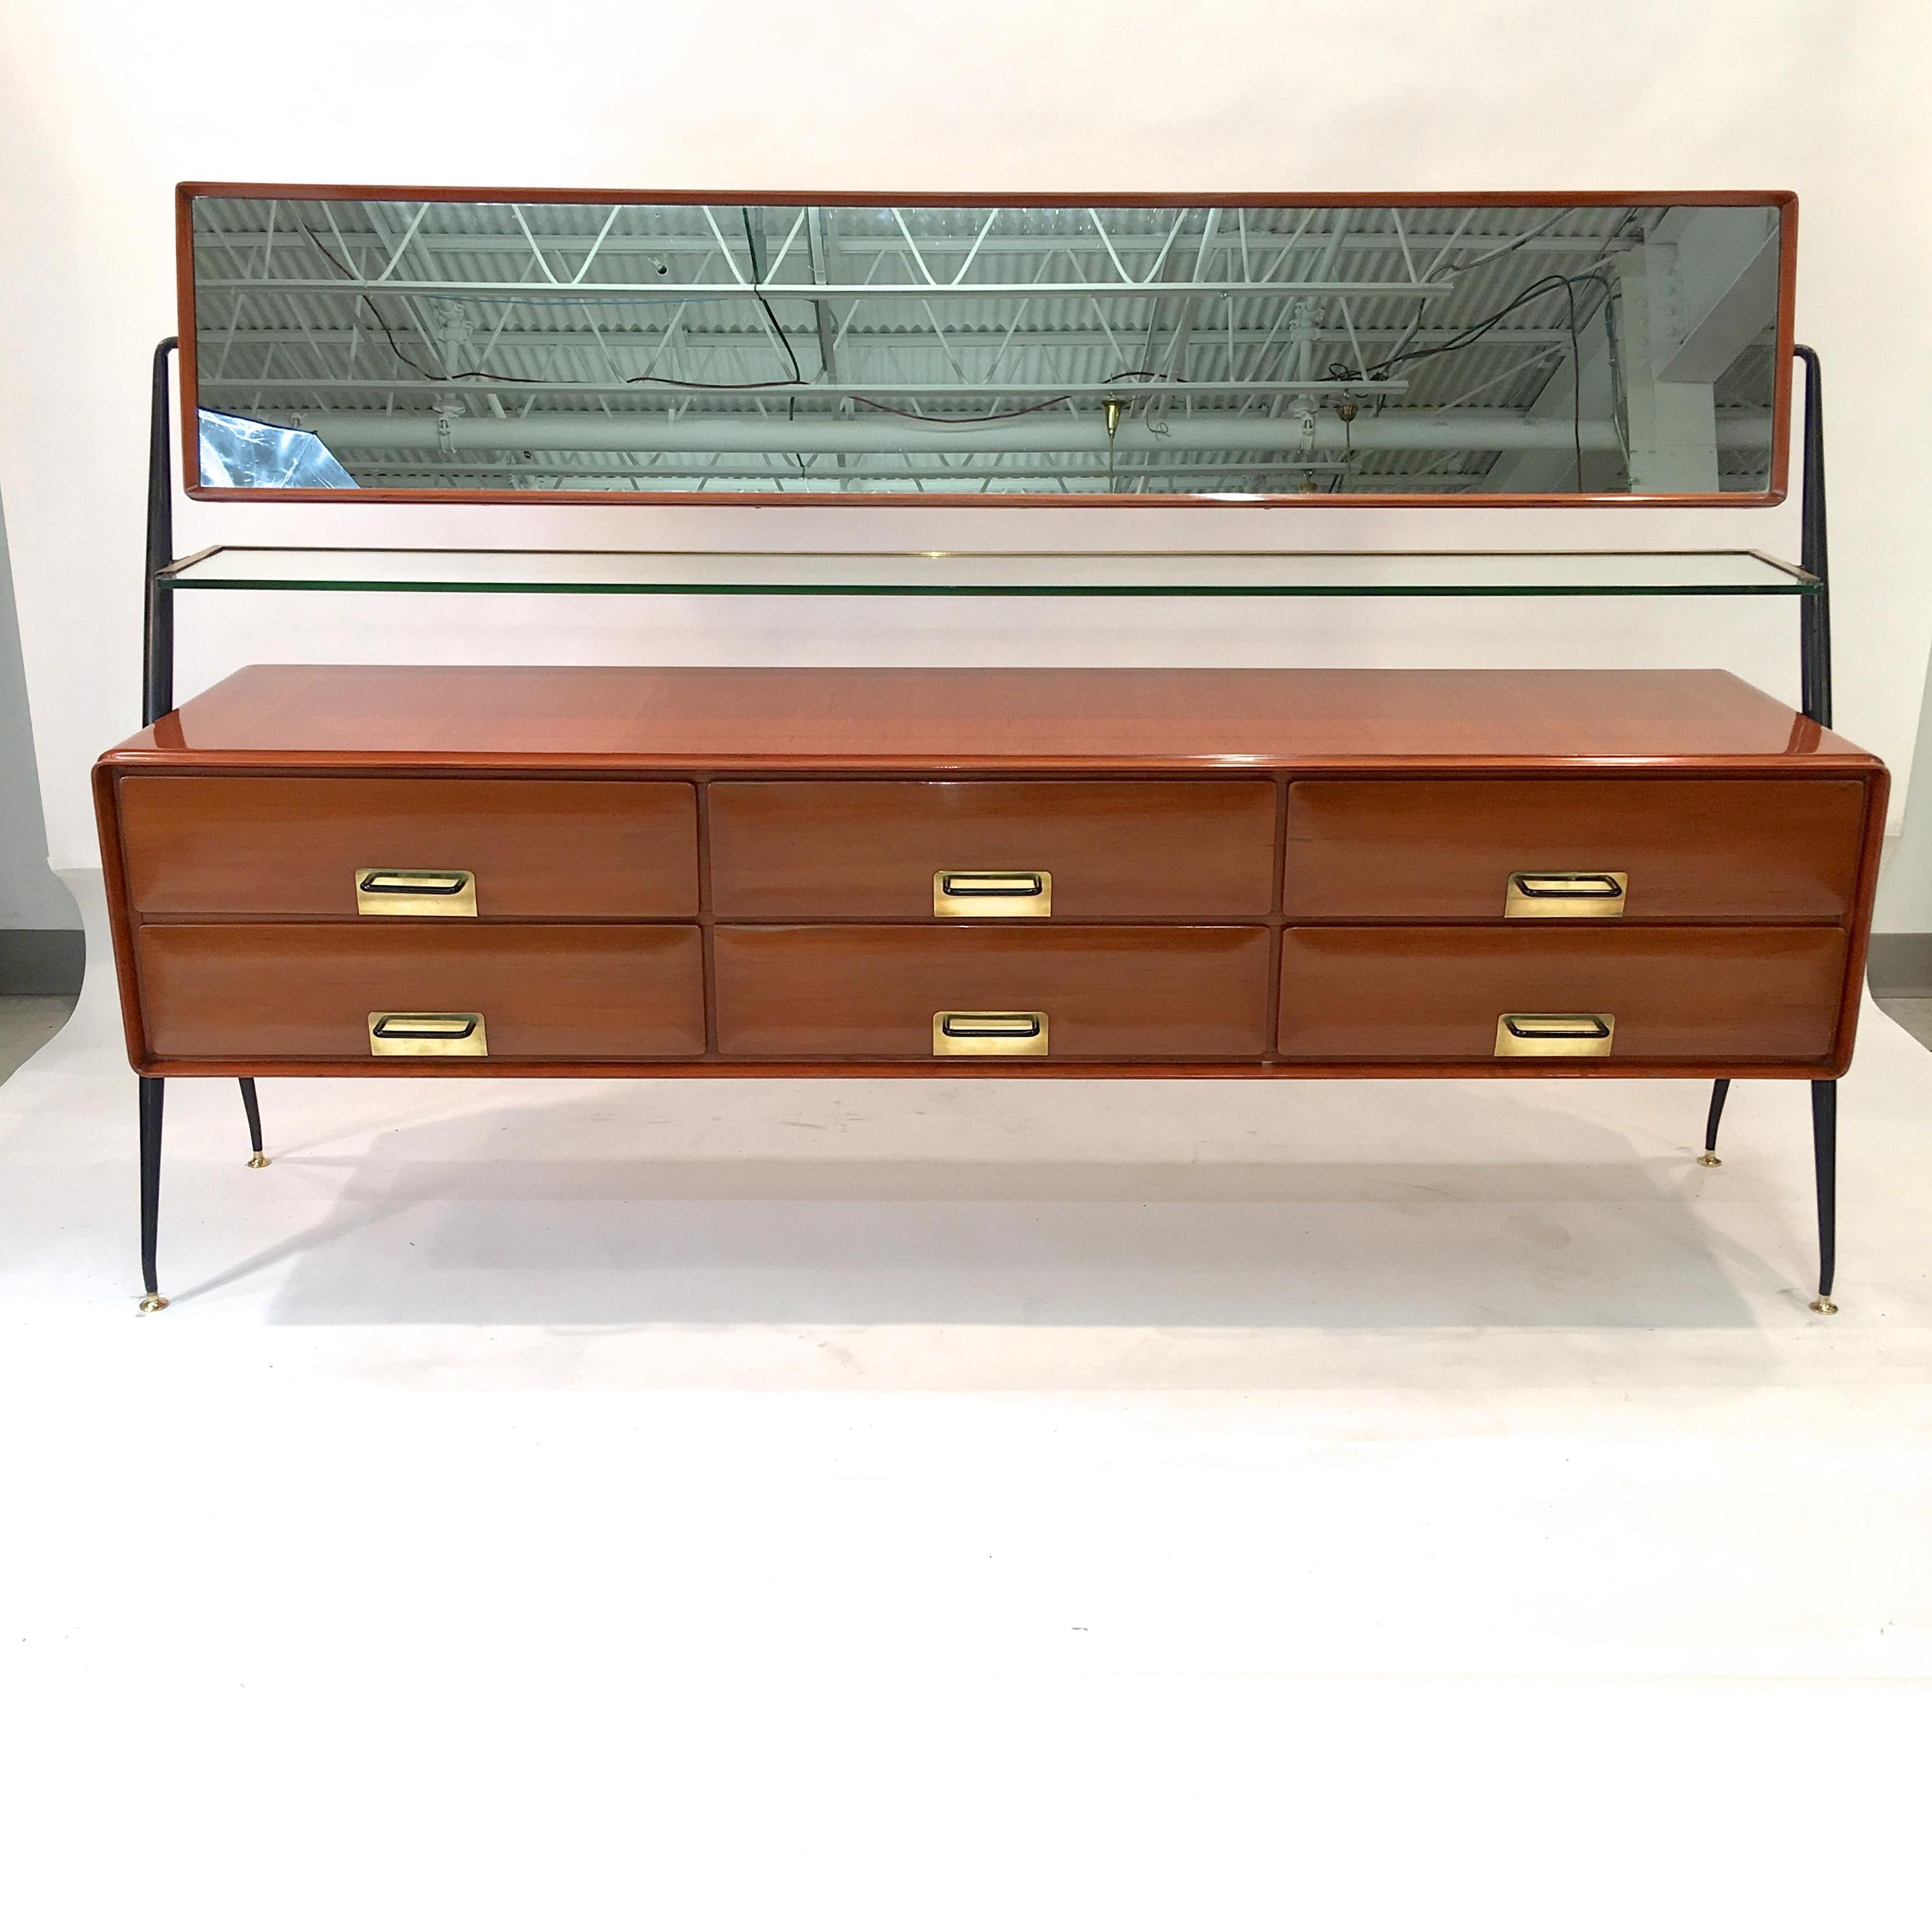 1950s Italian mahogany cabinet with six-drawers and a long horizontal tilting mahogany framed mirror over a brass framed crystal shelf, all mounted on distinctive tapered angular black steel supports each having two solid brass height adjustable